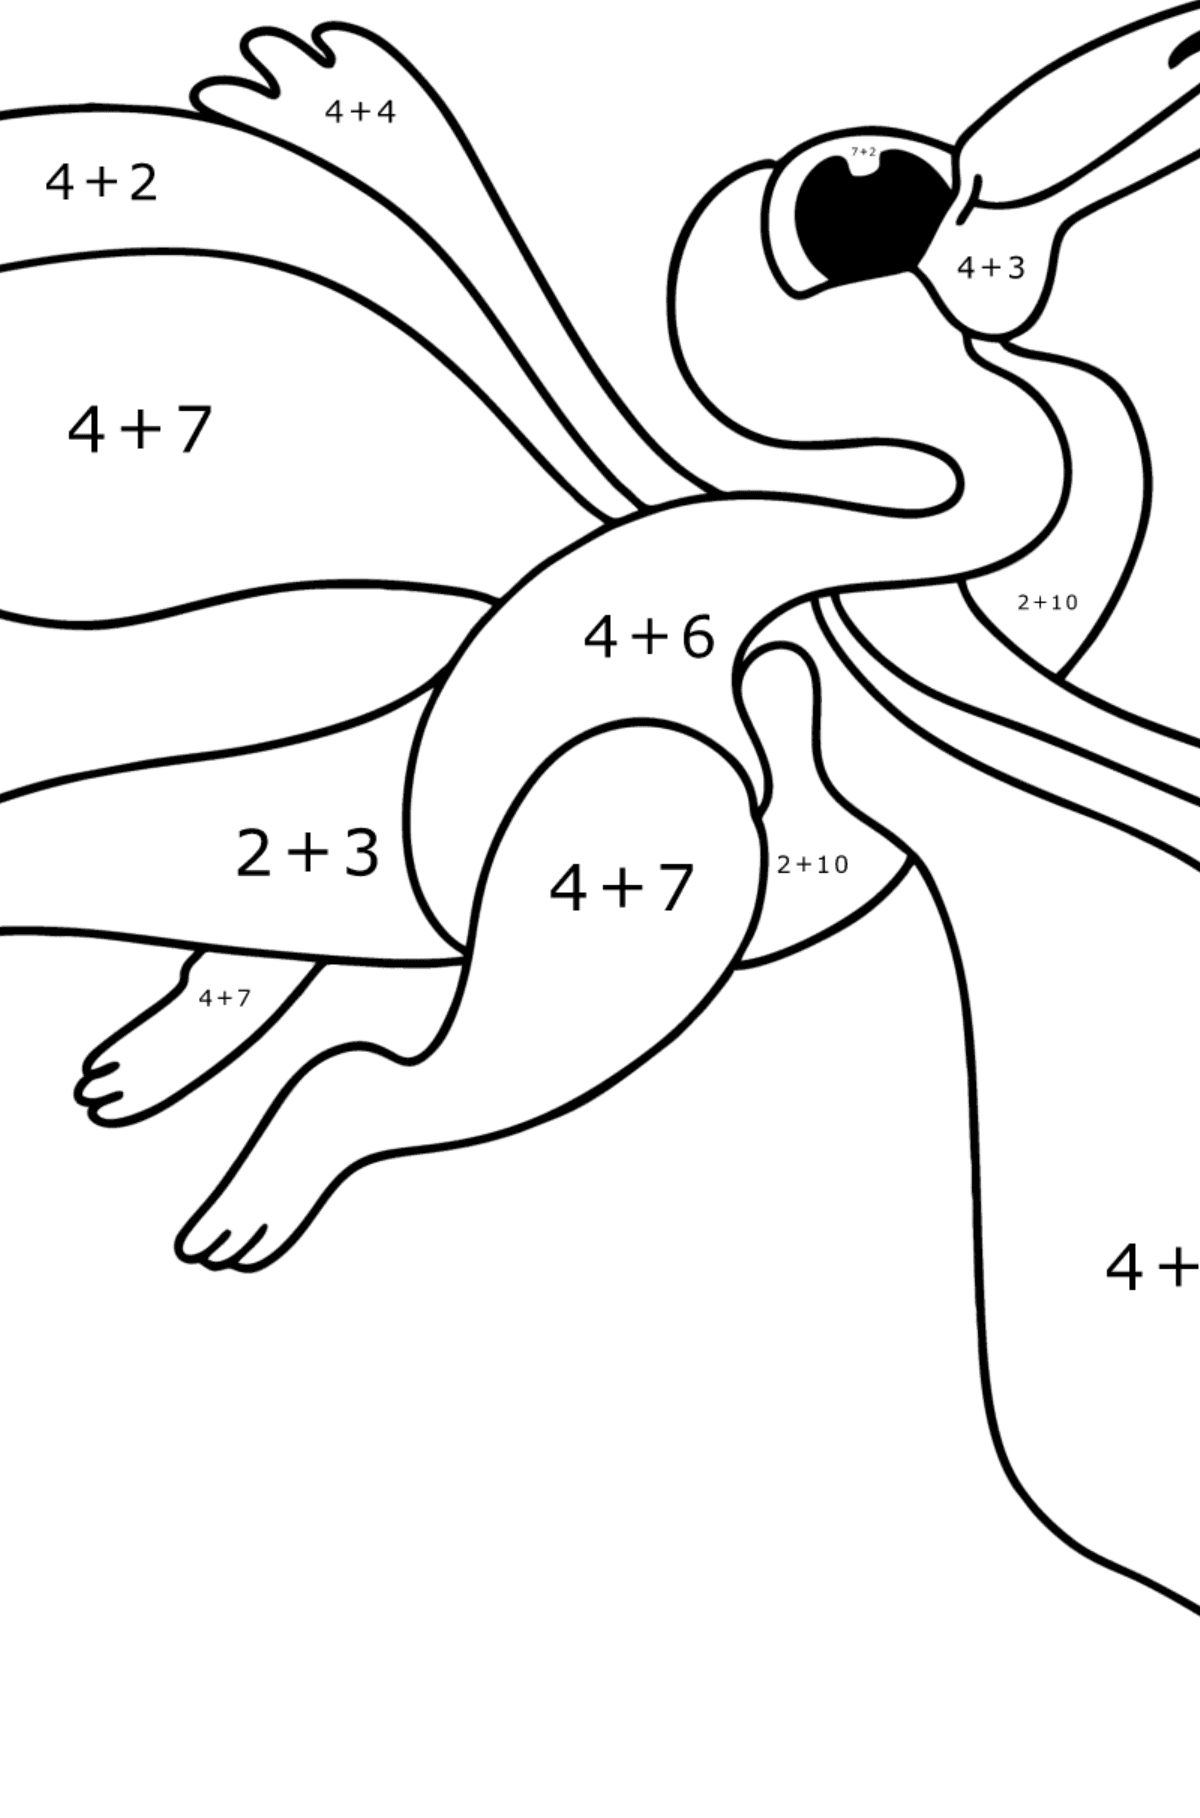 Pterodactyl coloring page - Math Coloring - Addition for Kids